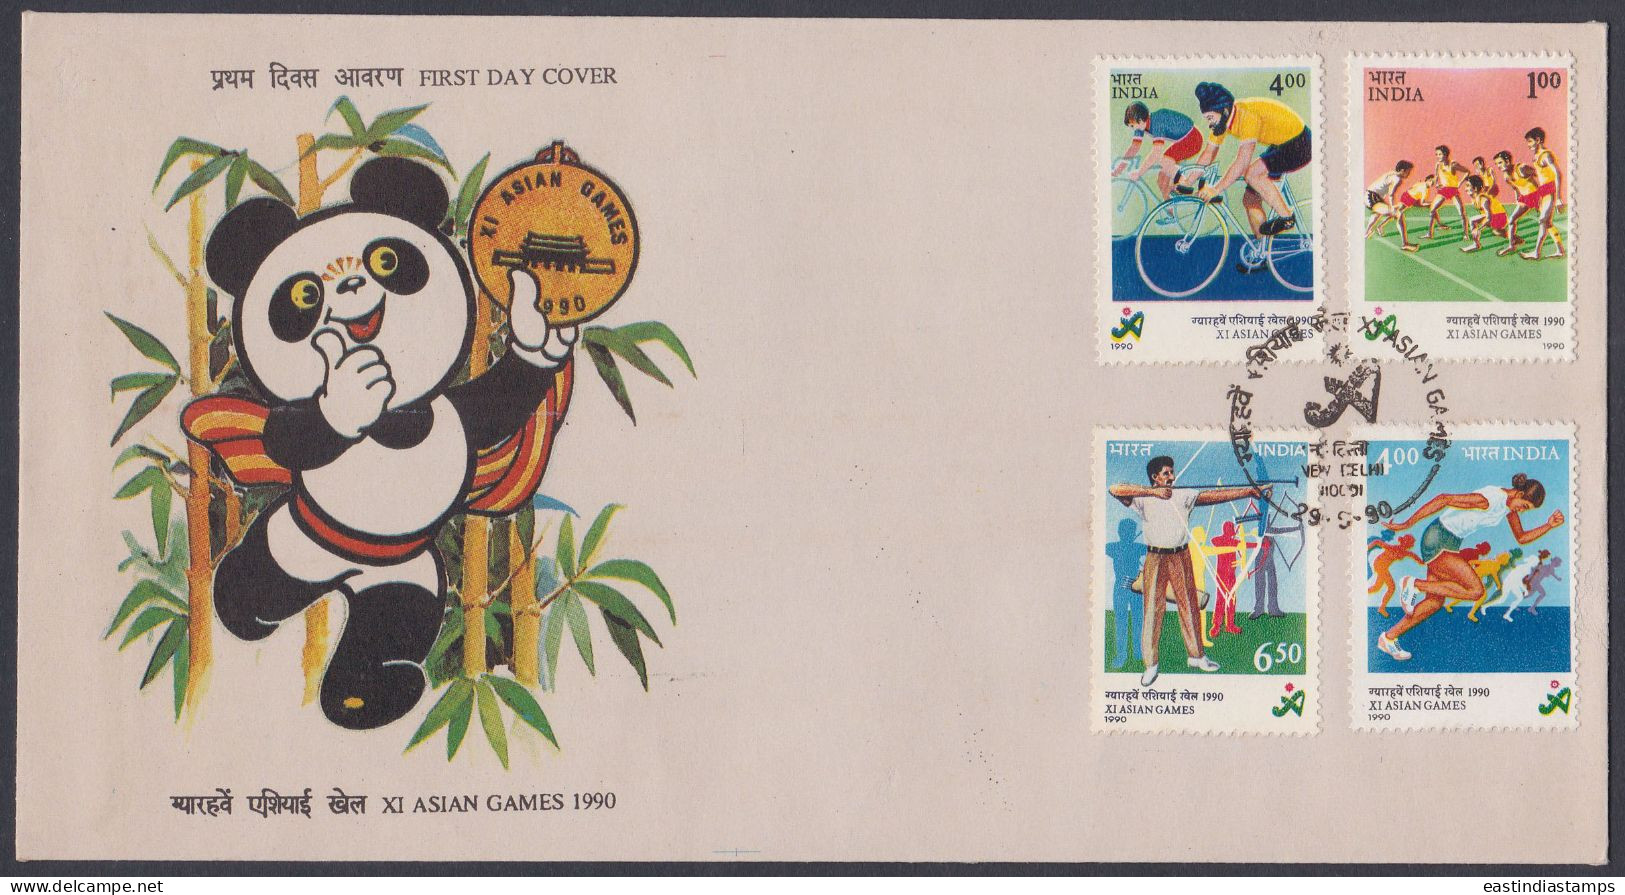 Inde India 1990 FDC Asian Games, Panda, Cycling, Cycle, Archery, Kabaddi, Athletics, Sport, Sports, First Day Cover - Briefe U. Dokumente